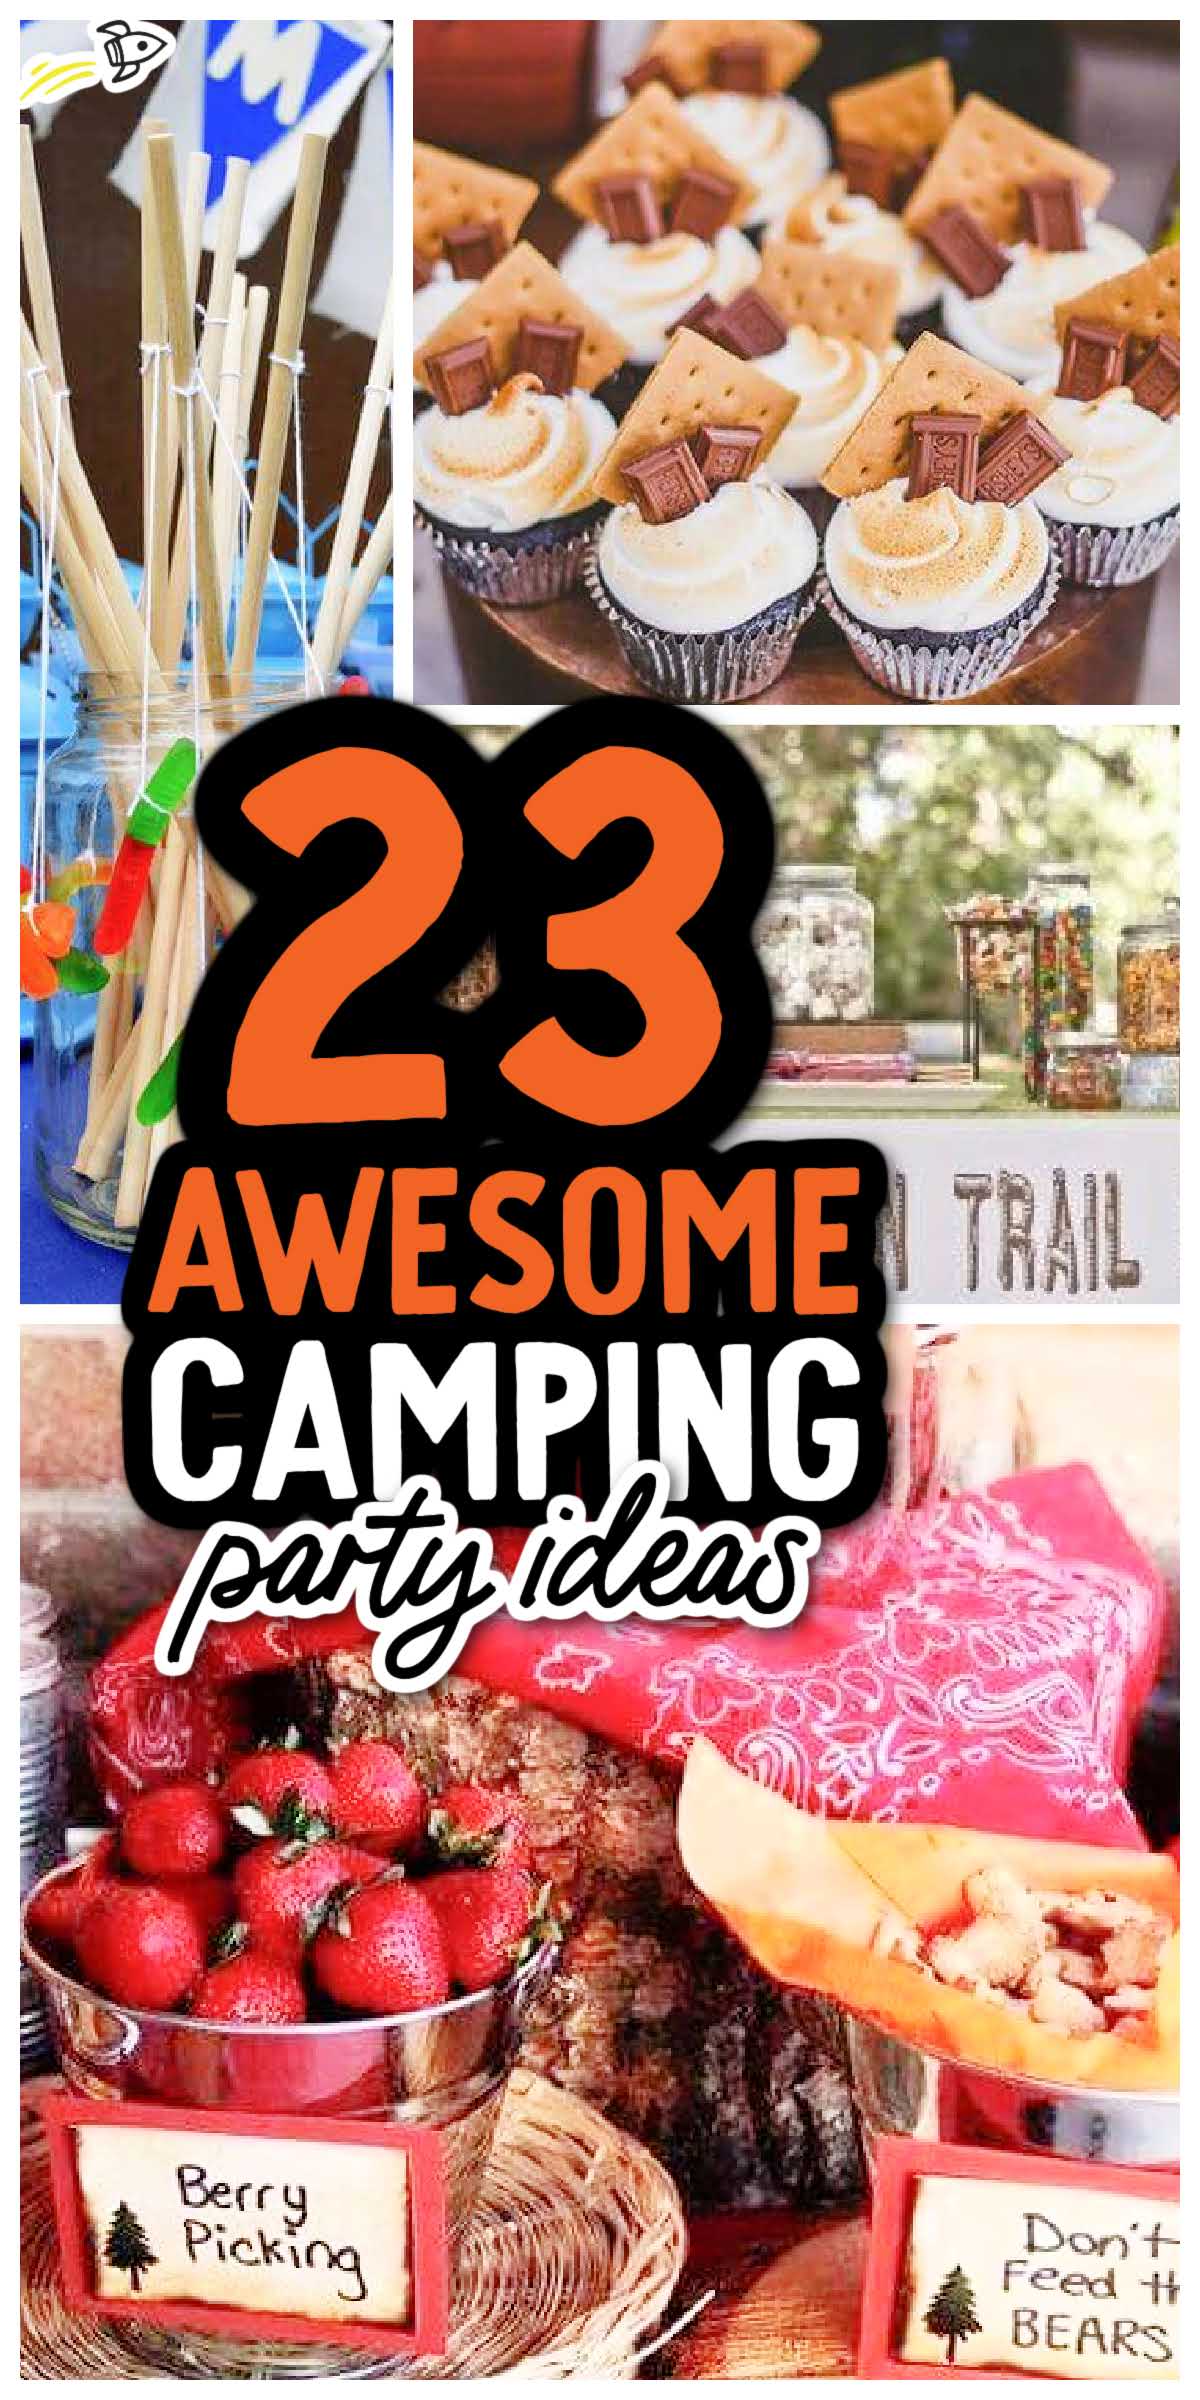 23 Awesome Camping Party Ideas - Spaceships and Laser Beams